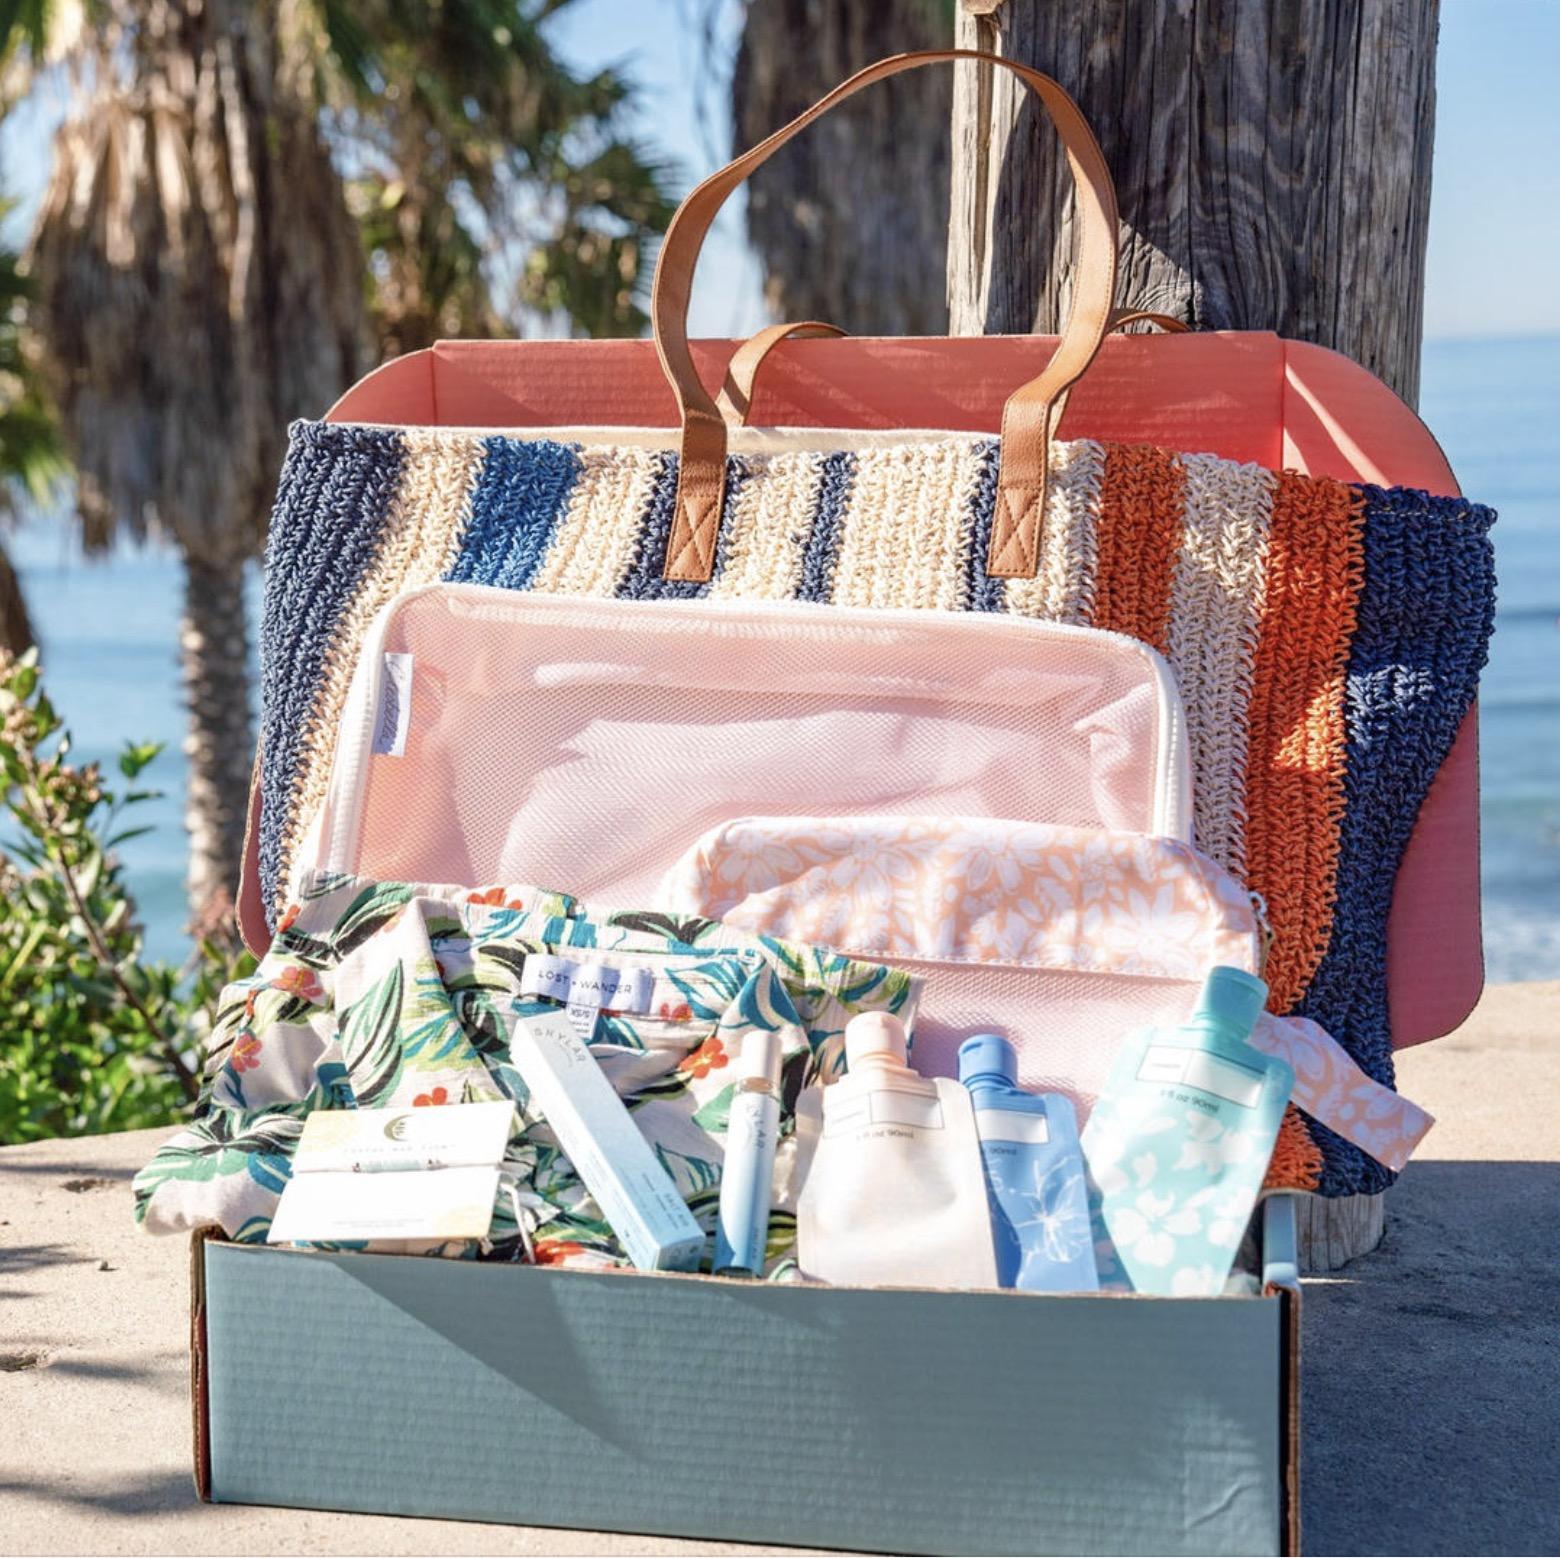 Beachly Coupon Code – Save $40 Off The Spring Box